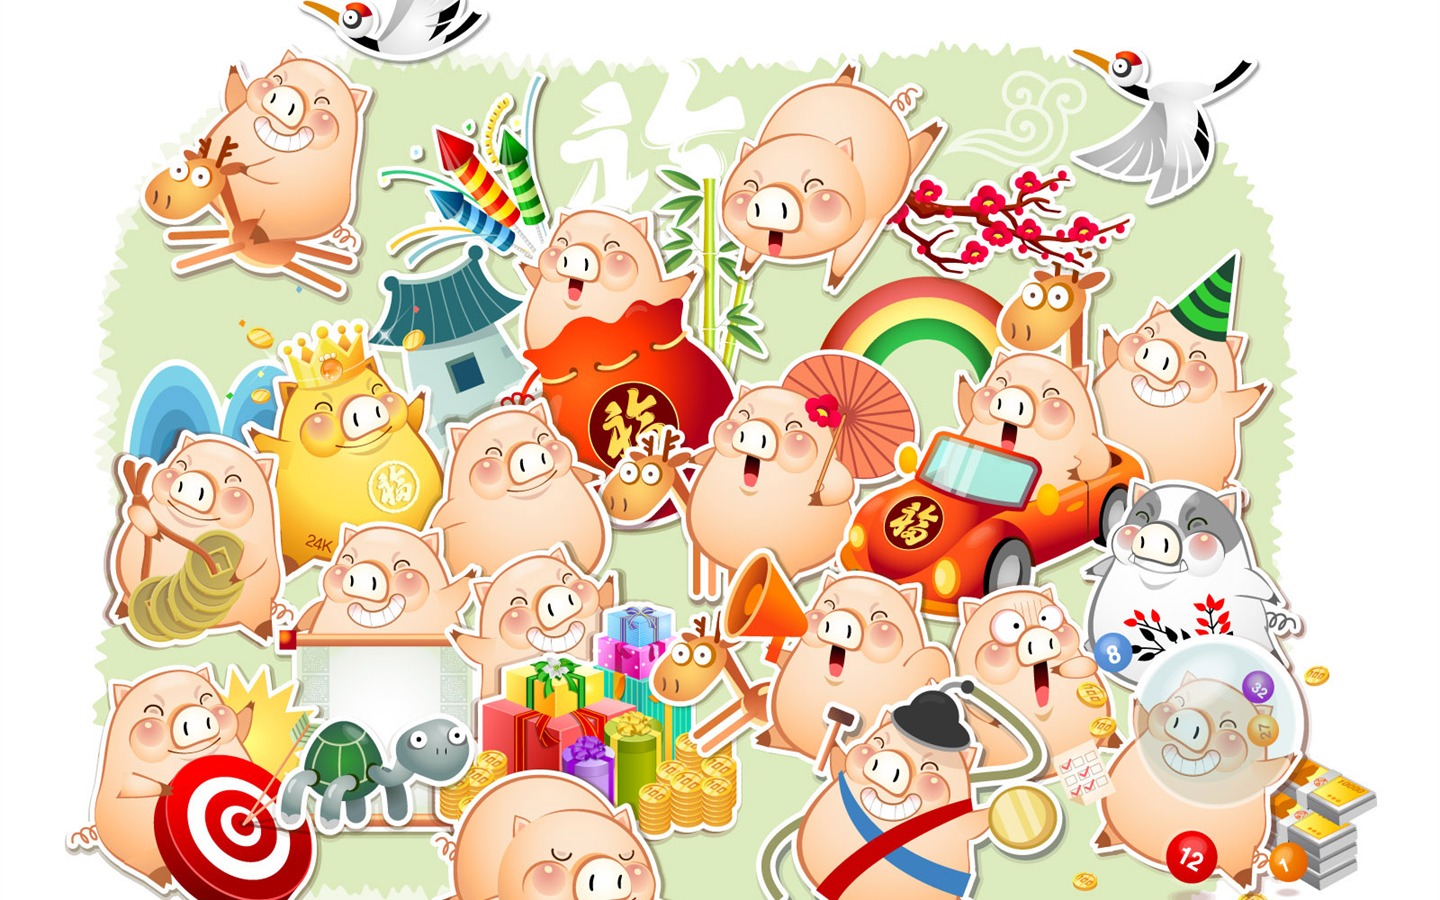 Year of the Pig Theme Wallpaper #2 - 1440x900